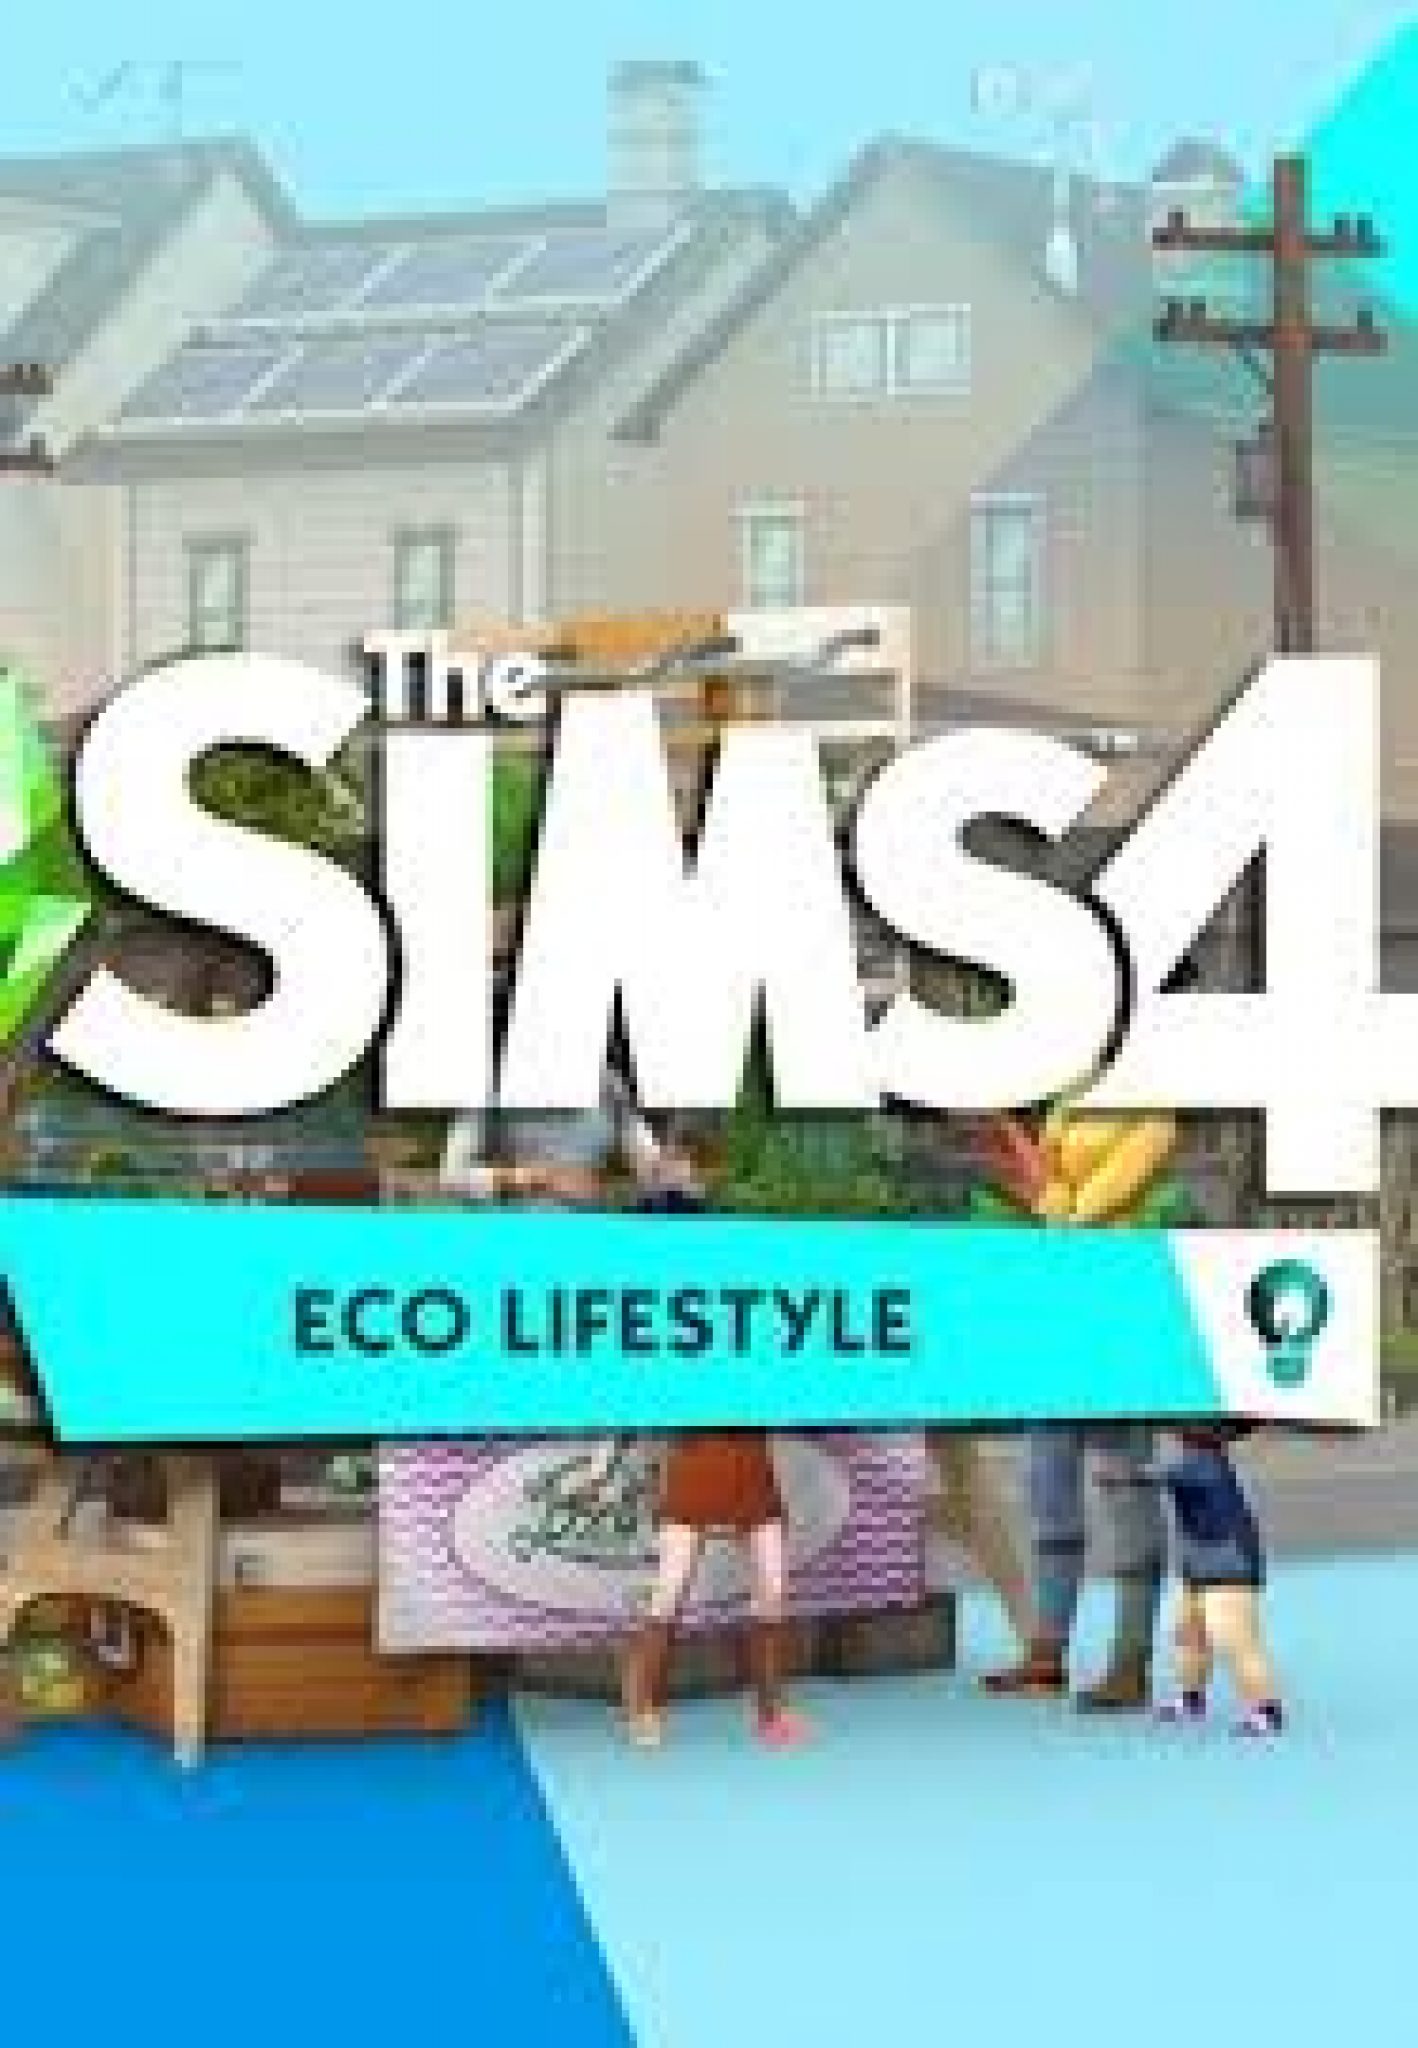 sims 4 game download